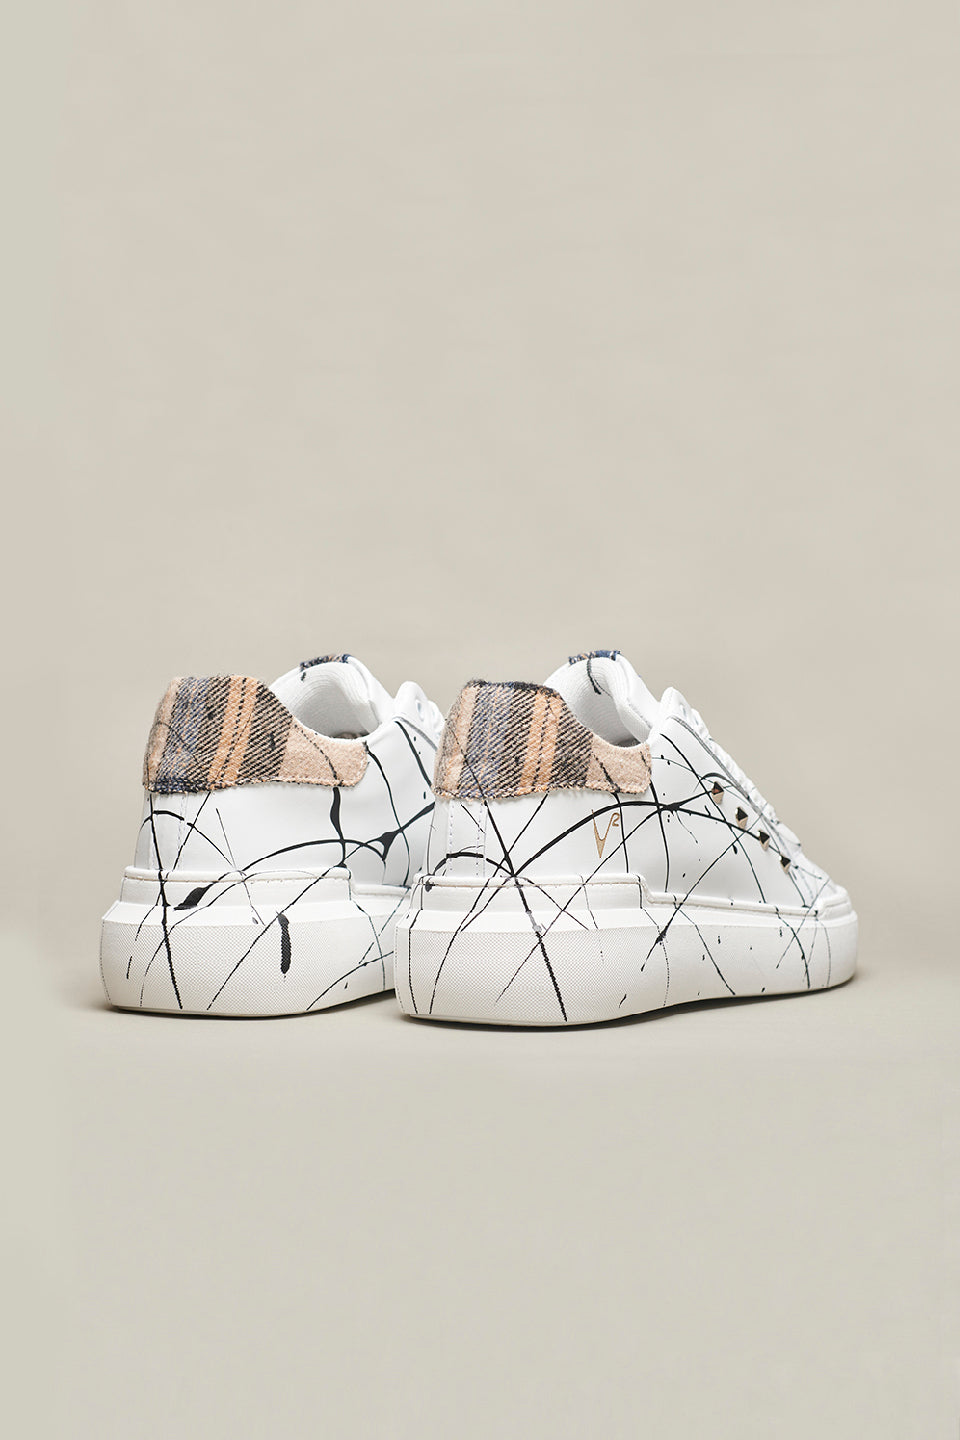 VEGA - Retro high sole sneakers in Scottish Sand fabric with studs and paint splashes